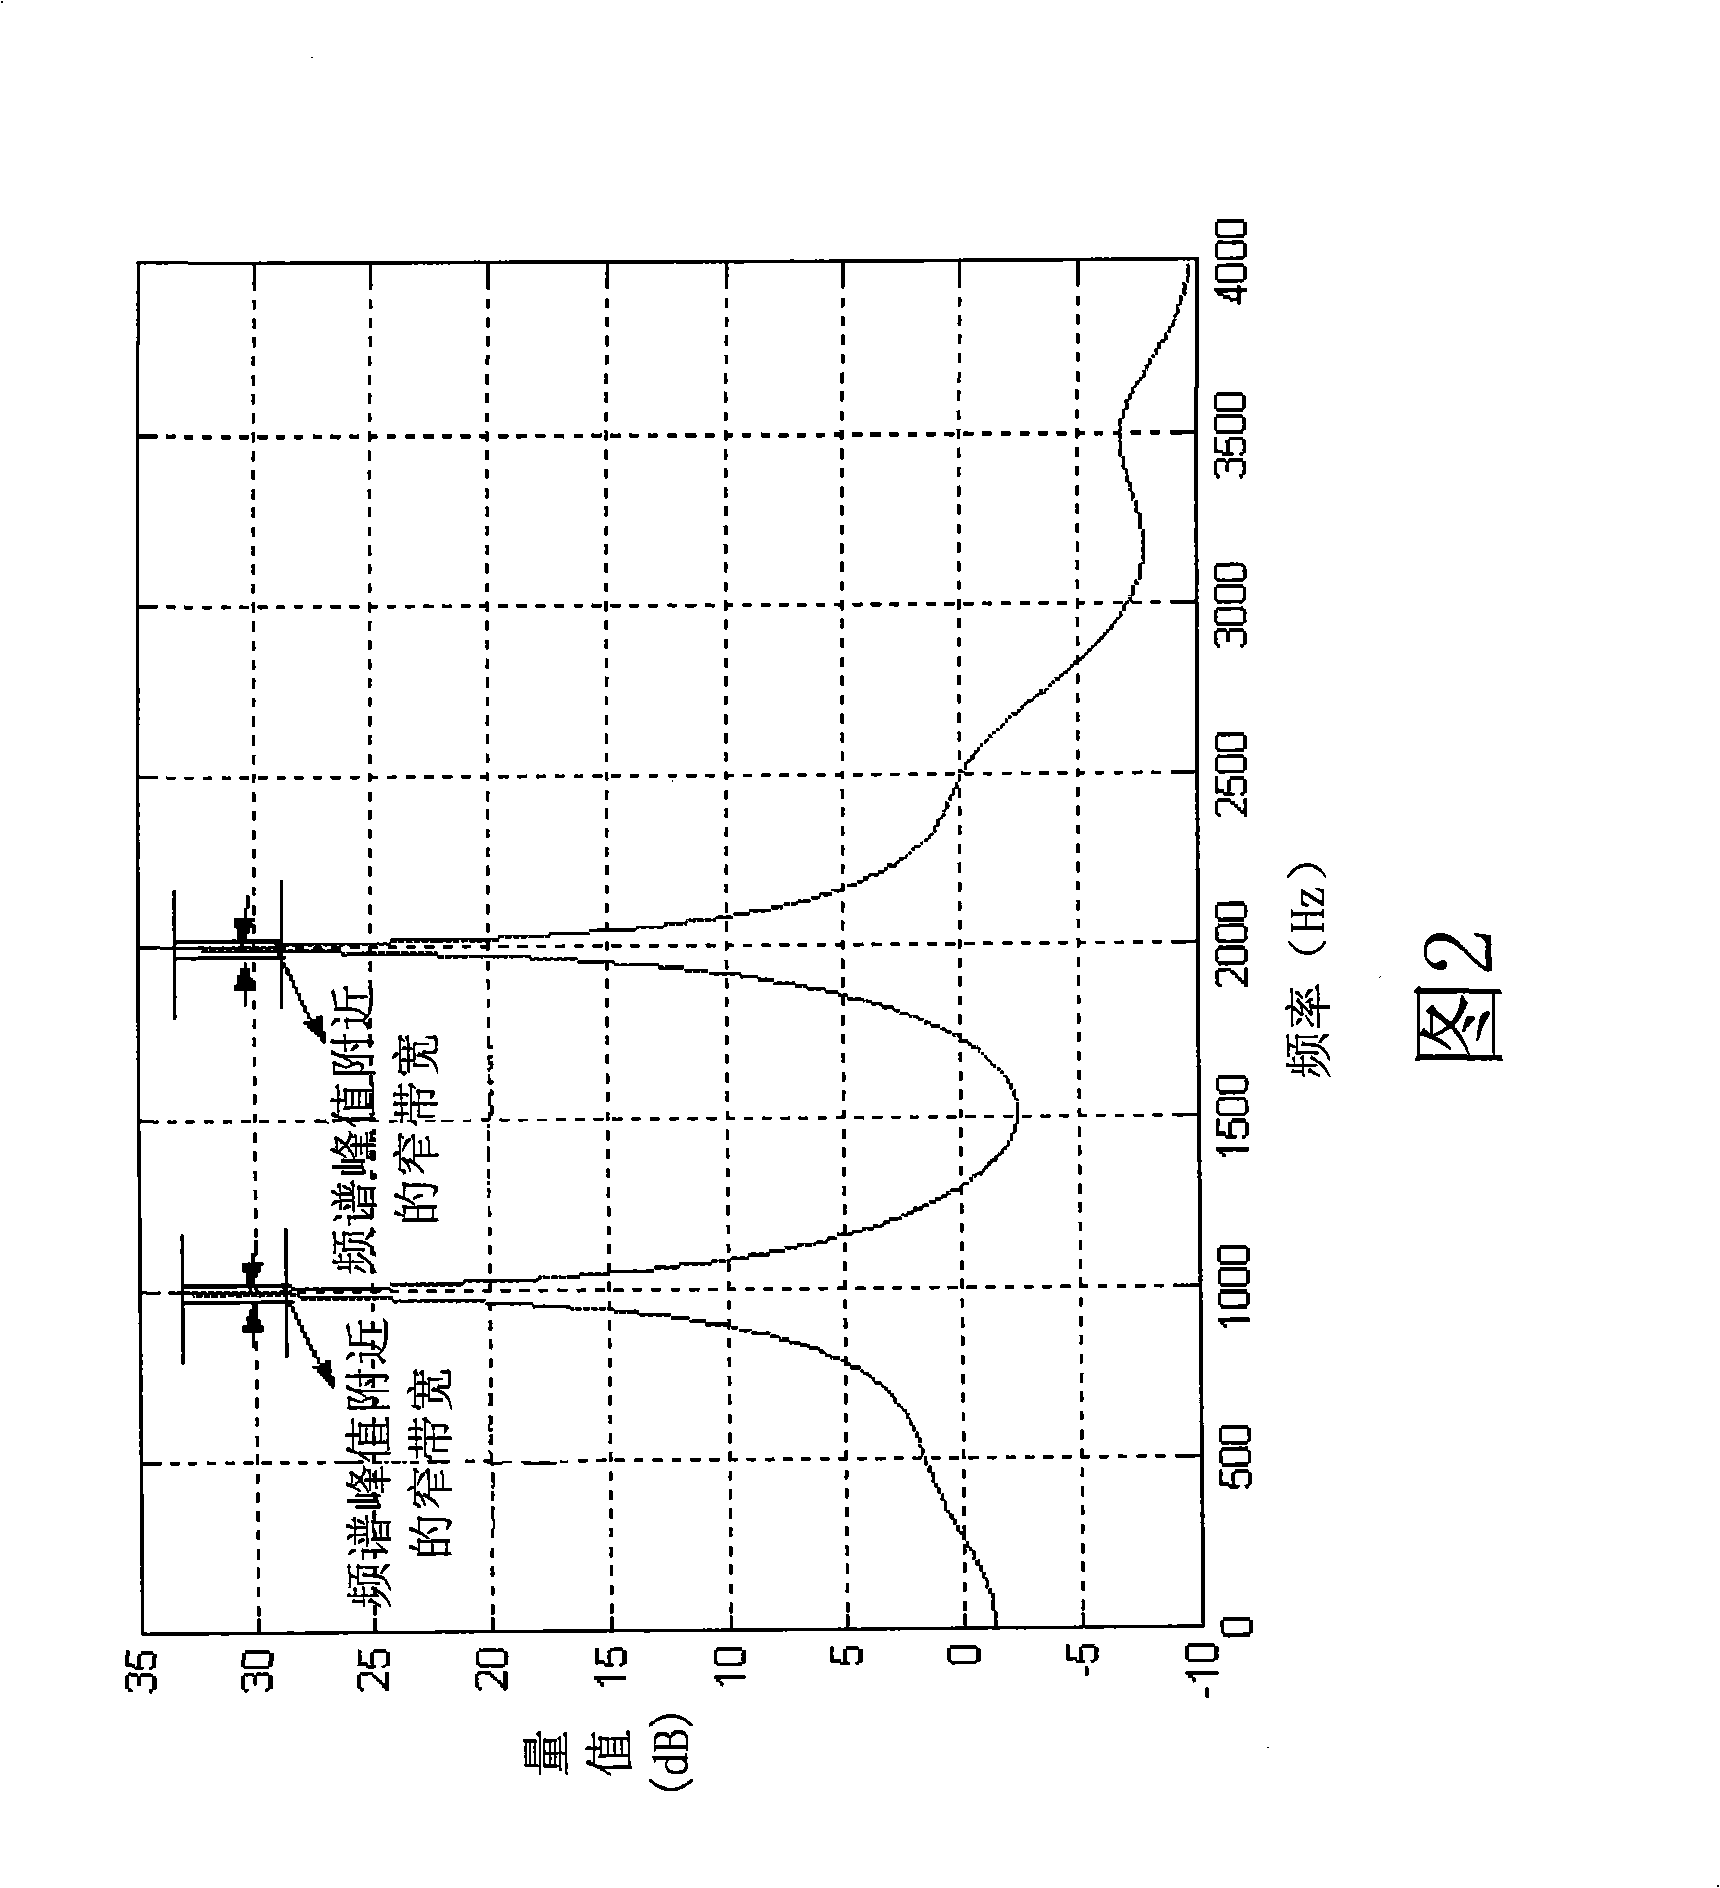 Systems, methods, and apparatus for detection of tonal components